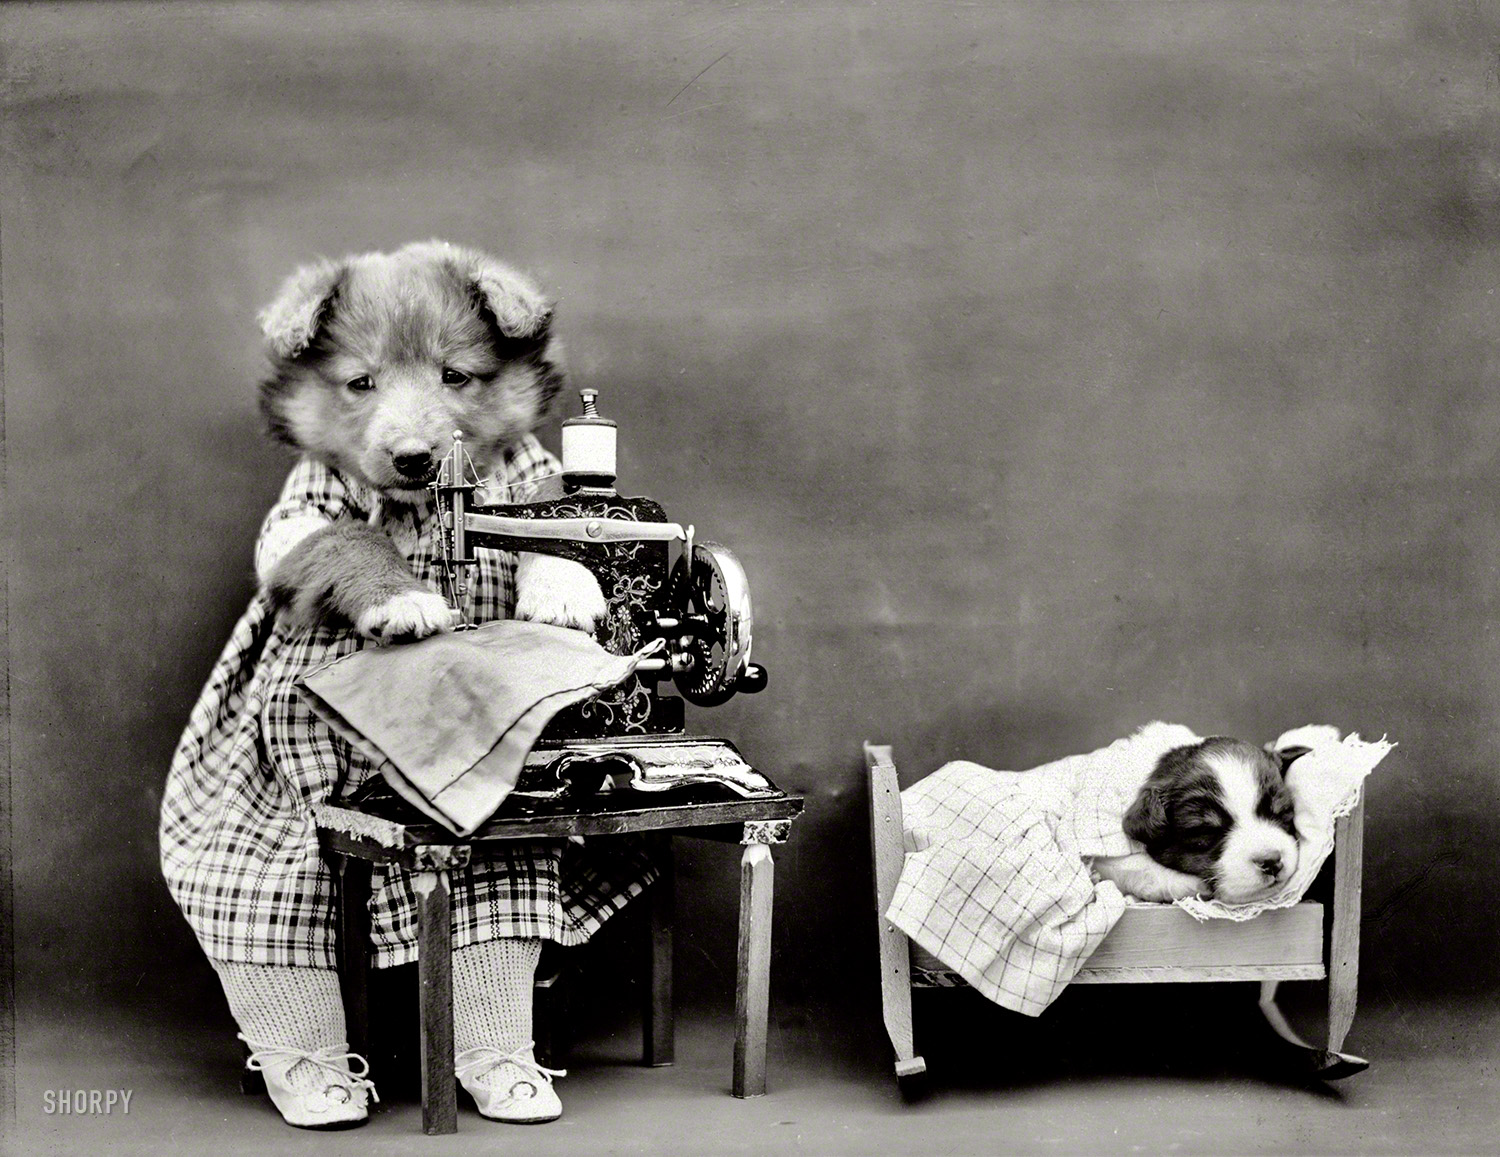 1914. "Puppy in crib next to 'mother' in costume using toy sewing machine." (The kittens are traveling this week.) Photo by Harry W. Frees. View full size.